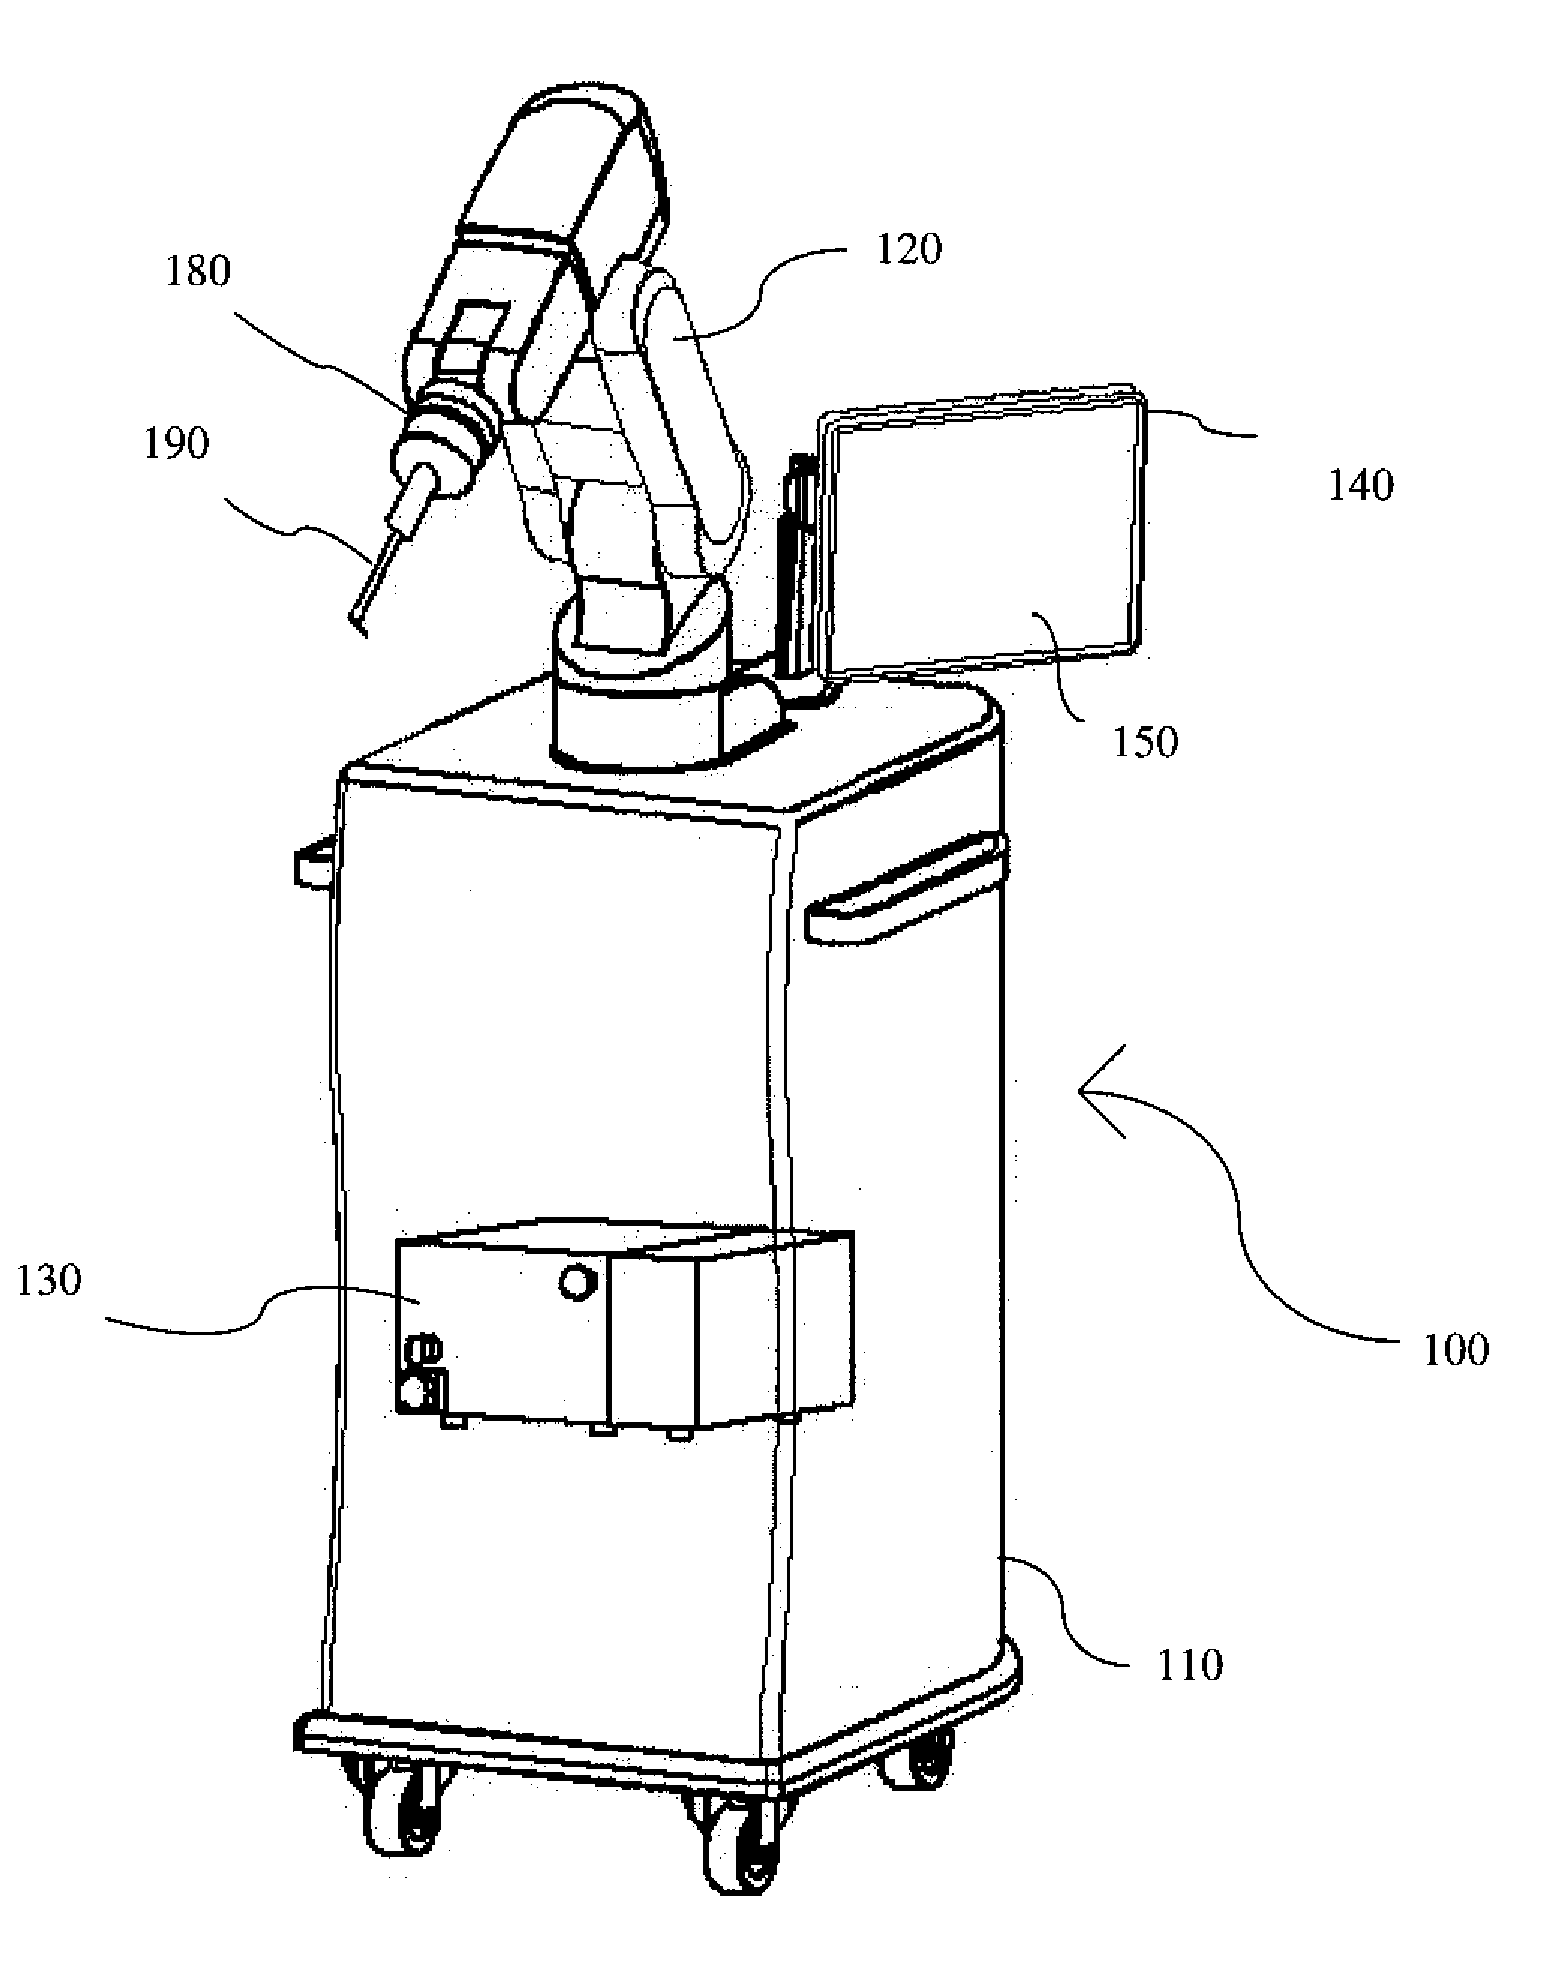 Imageless robotized device and method for surgical tool guidance